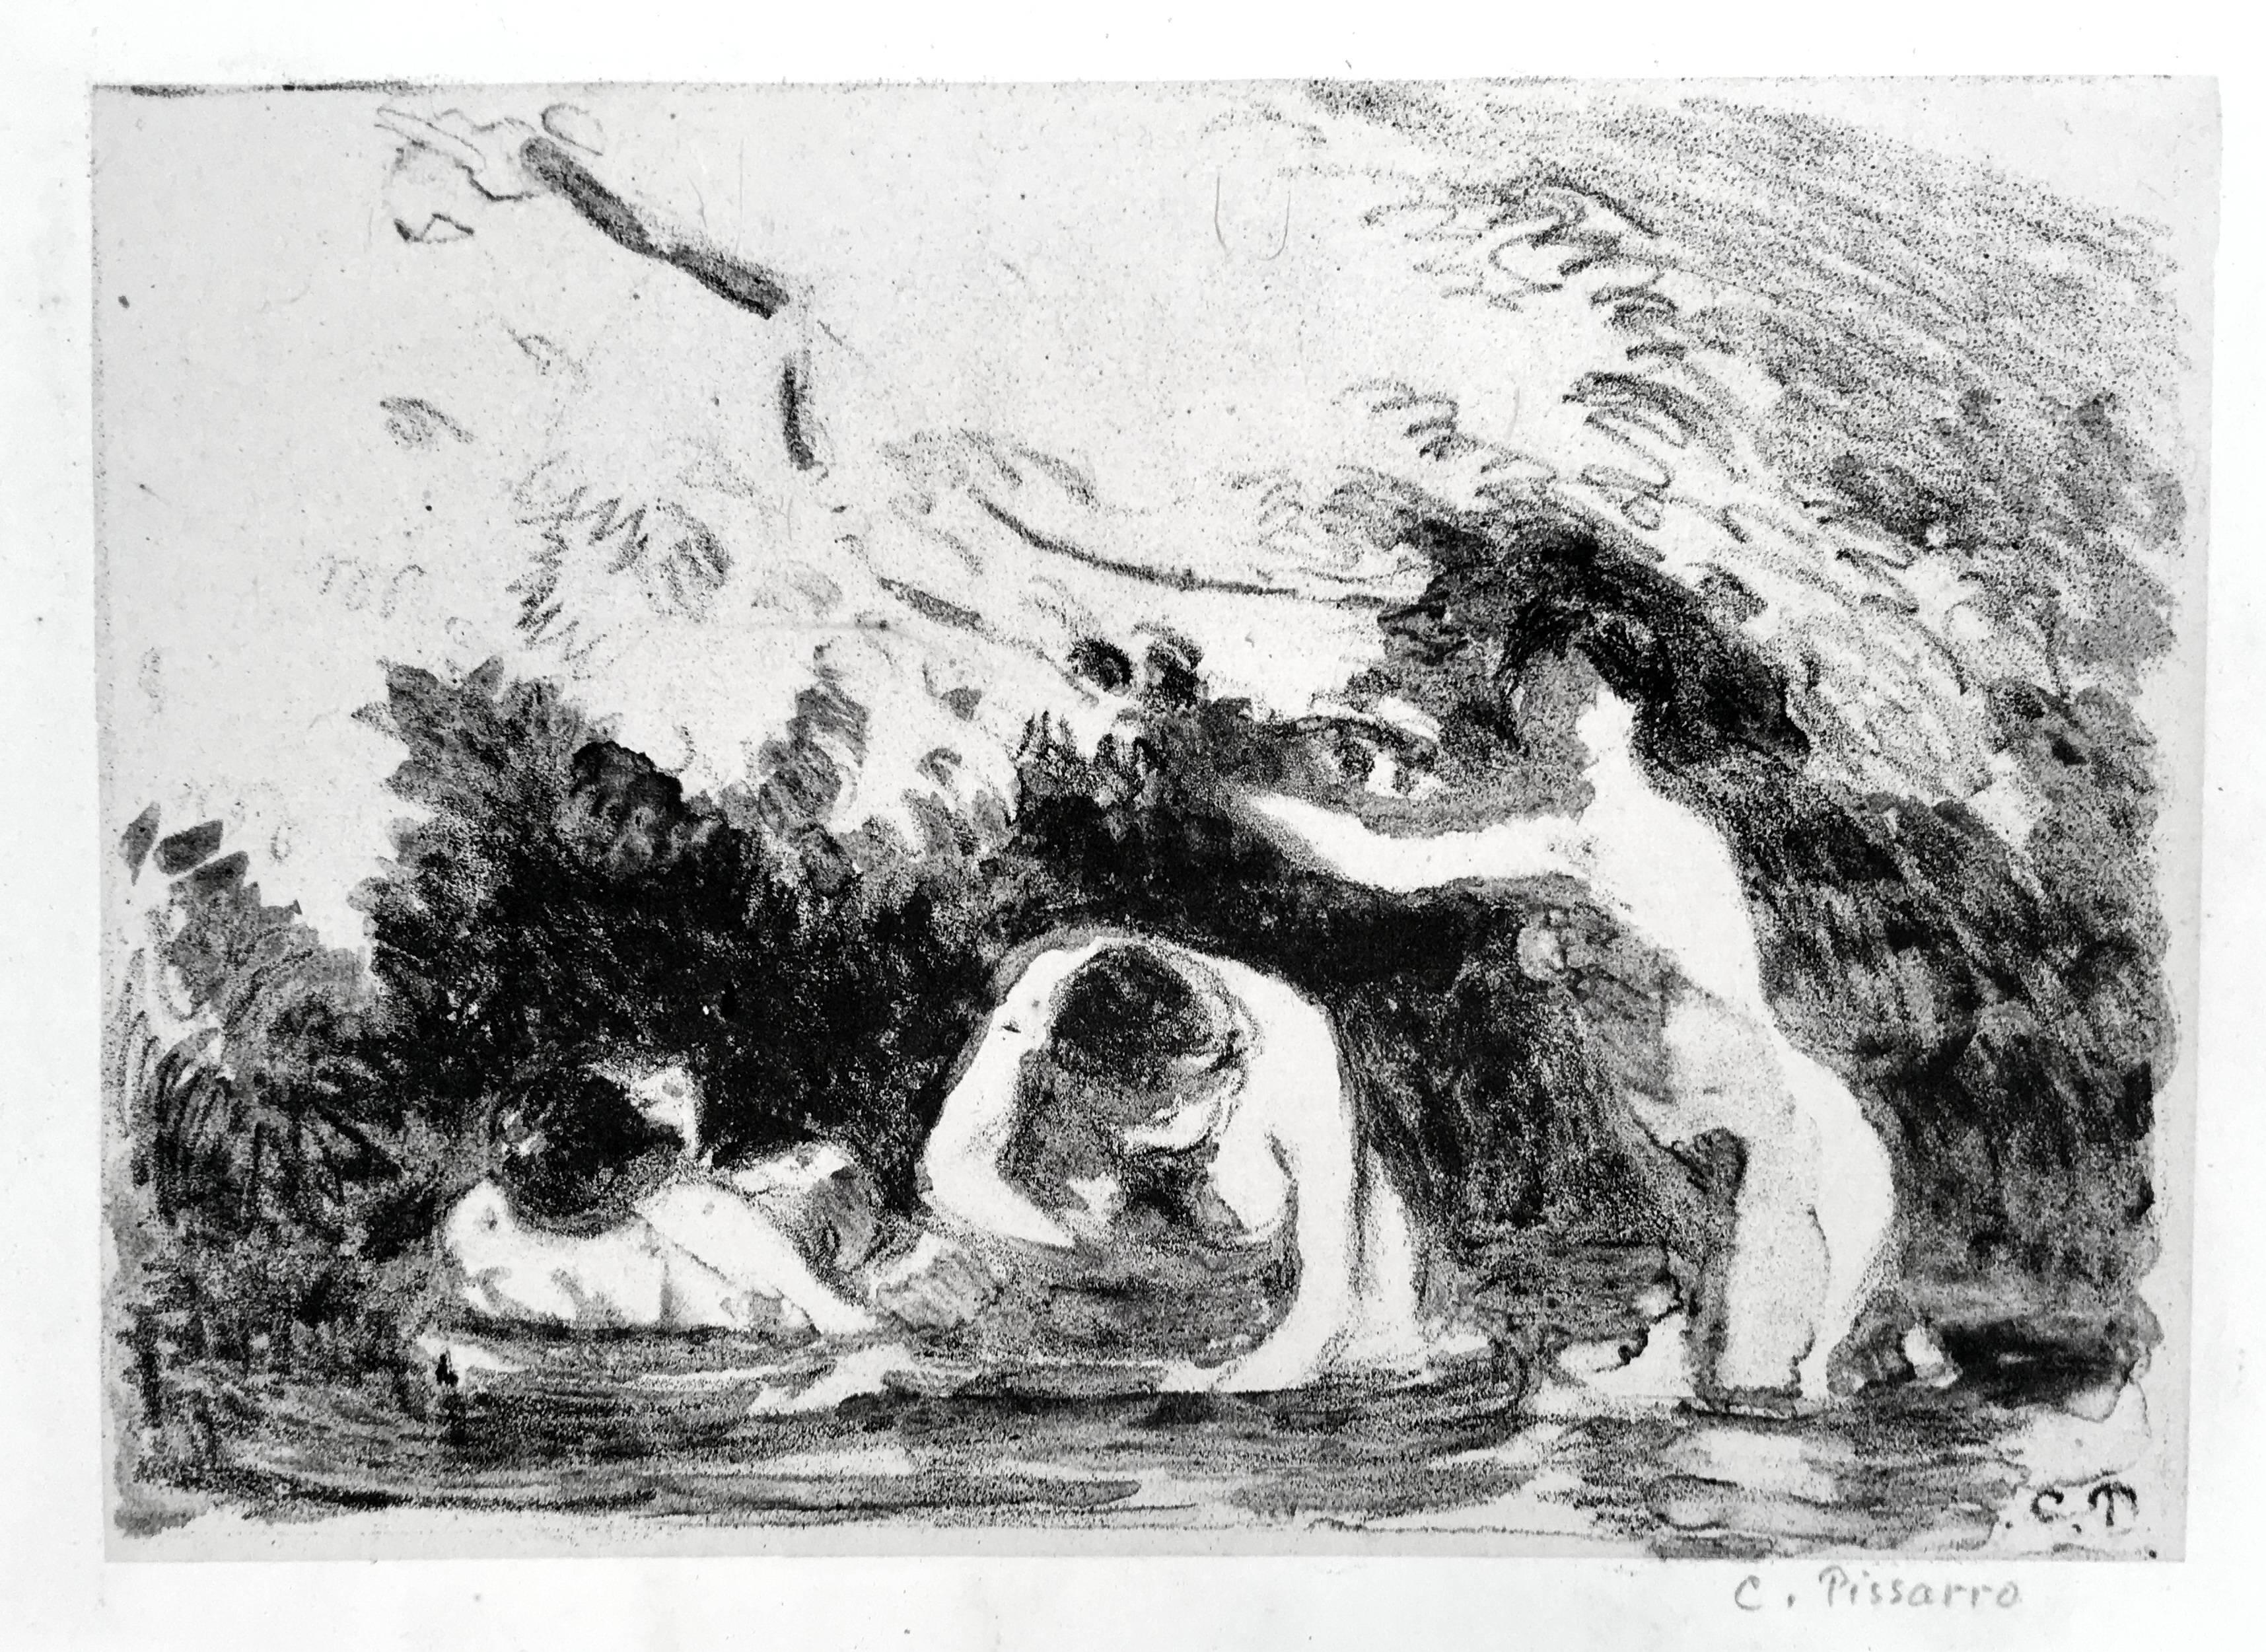 Baigneuses a L’Ombre des Berges Boisees (Women Bathing in the Wooded Shade...)